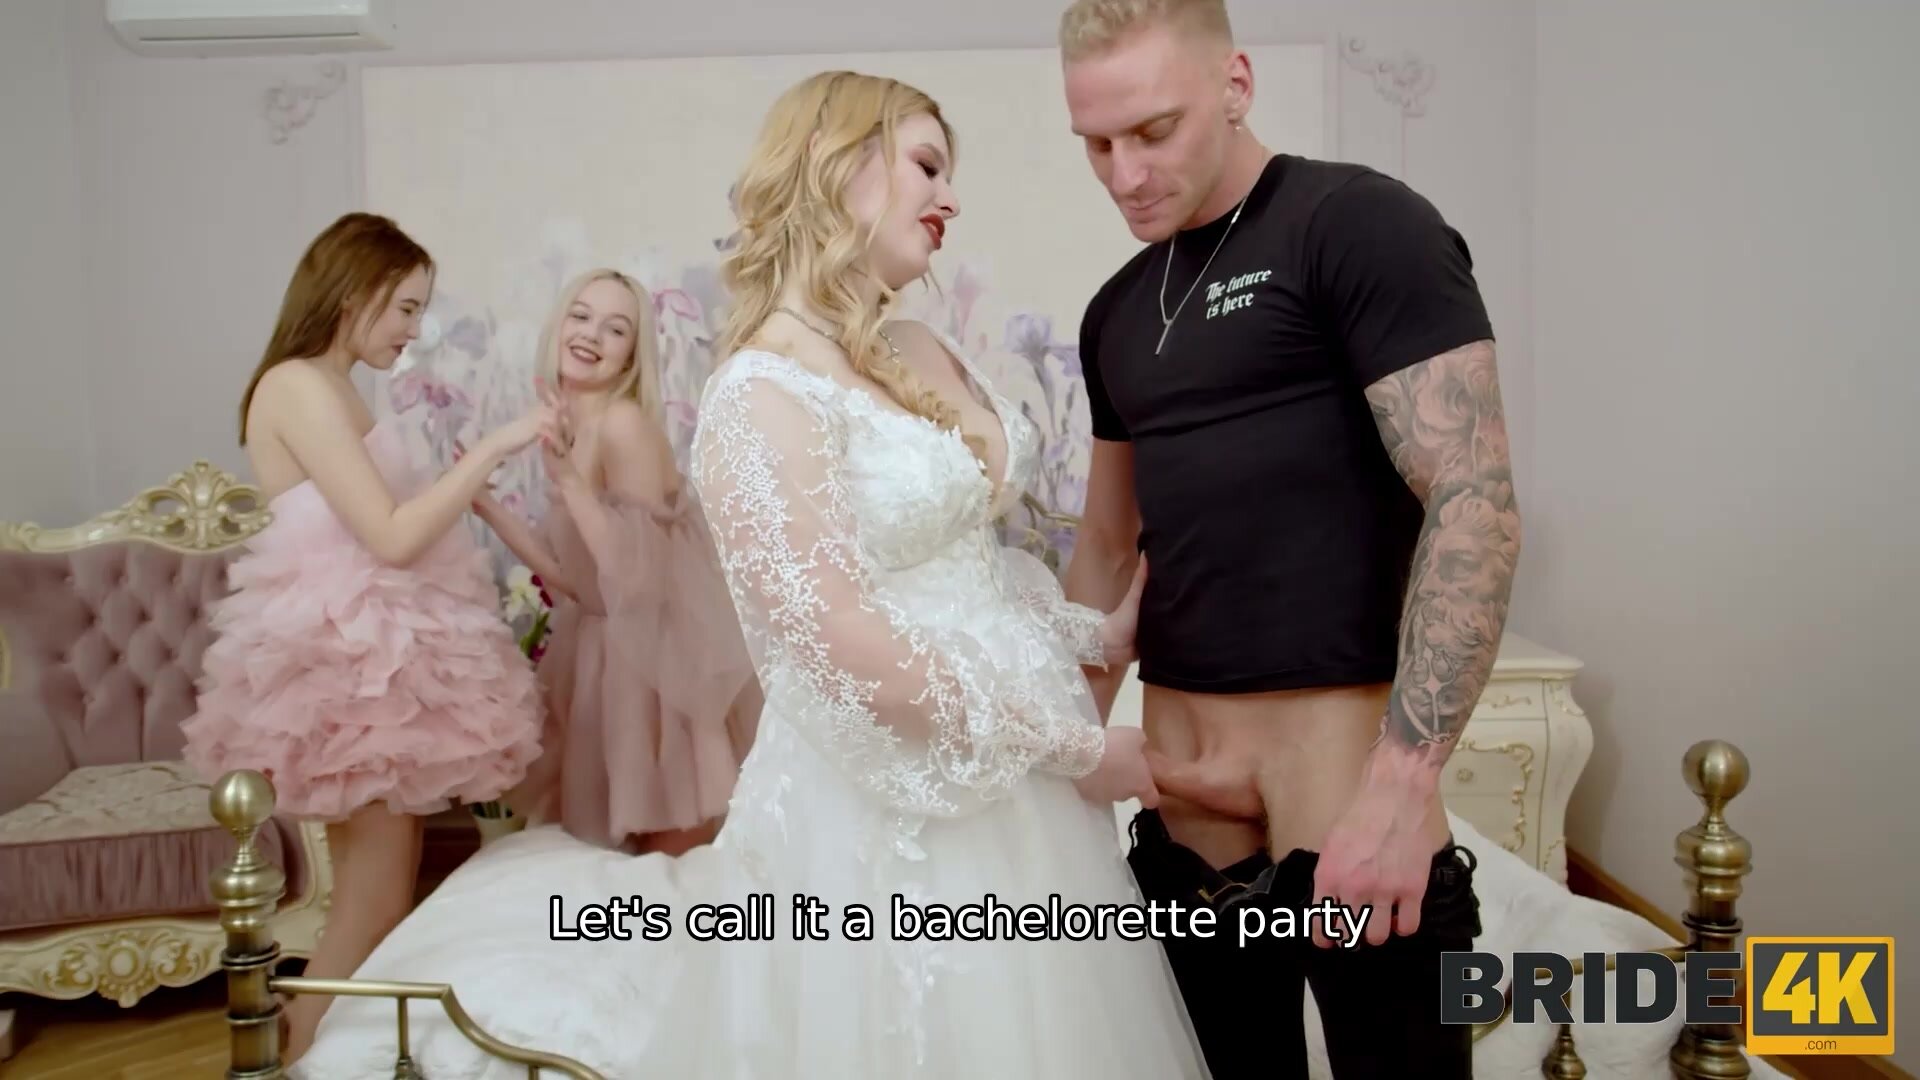 BRIDE4K. Babe shares her groom with two best friends right after the wedding ceremony